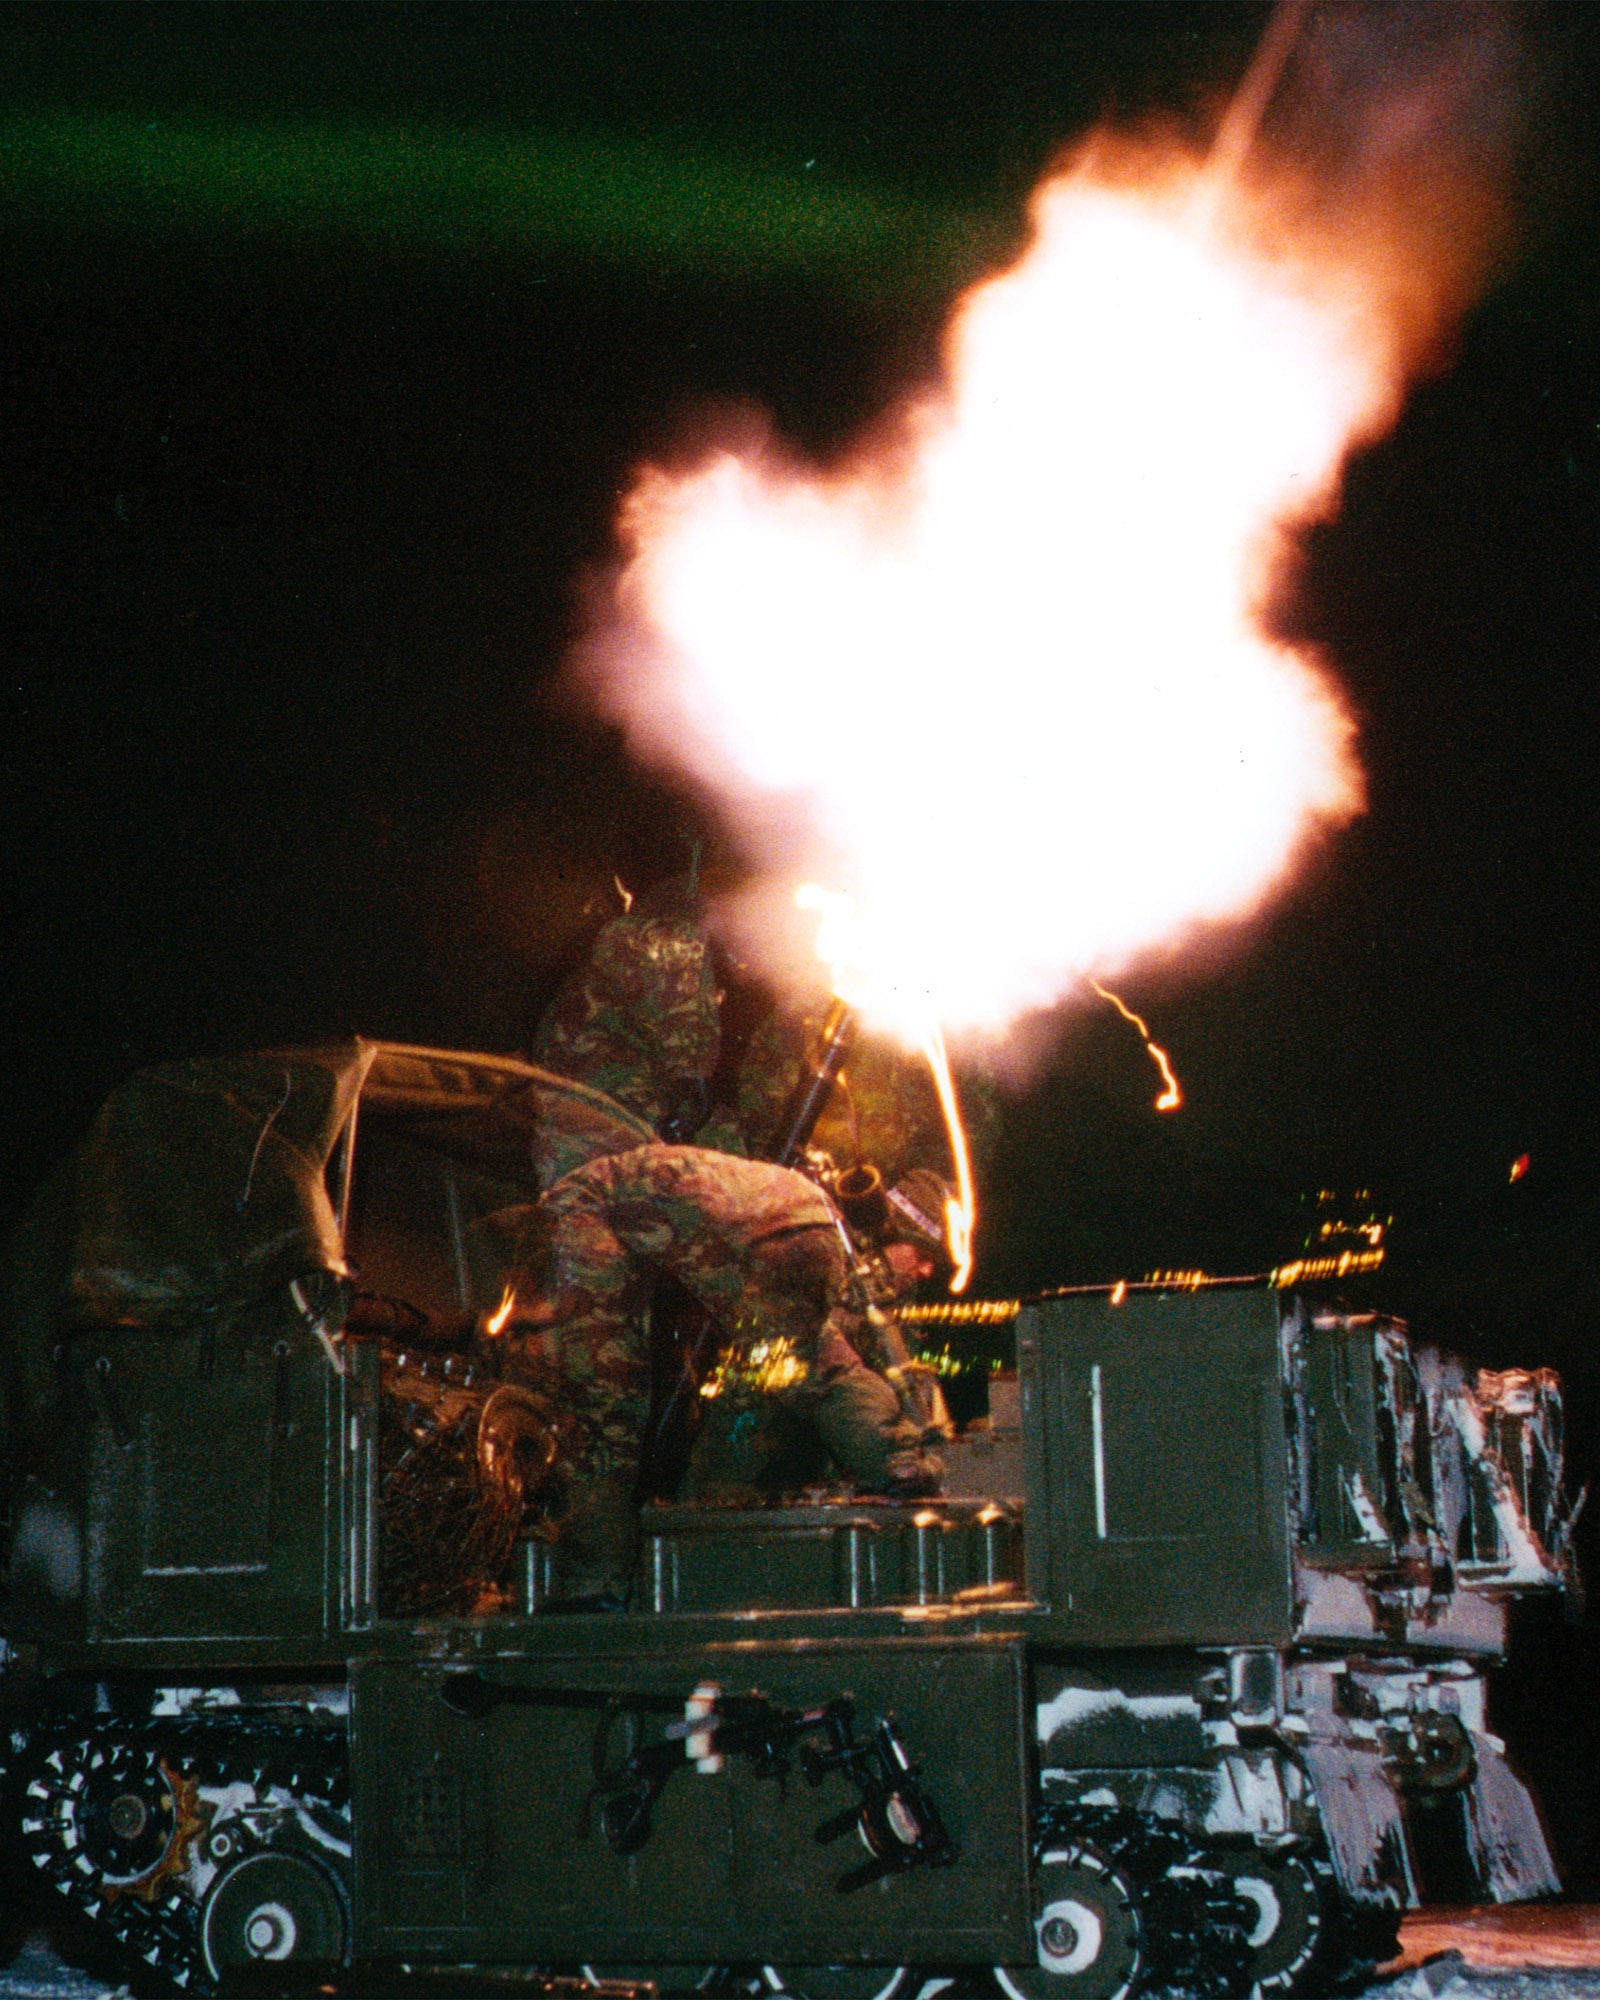 Royal_Marines_Firing_a_Mortar_on_Exercise_in_Norway_MOD_45138196.jpg